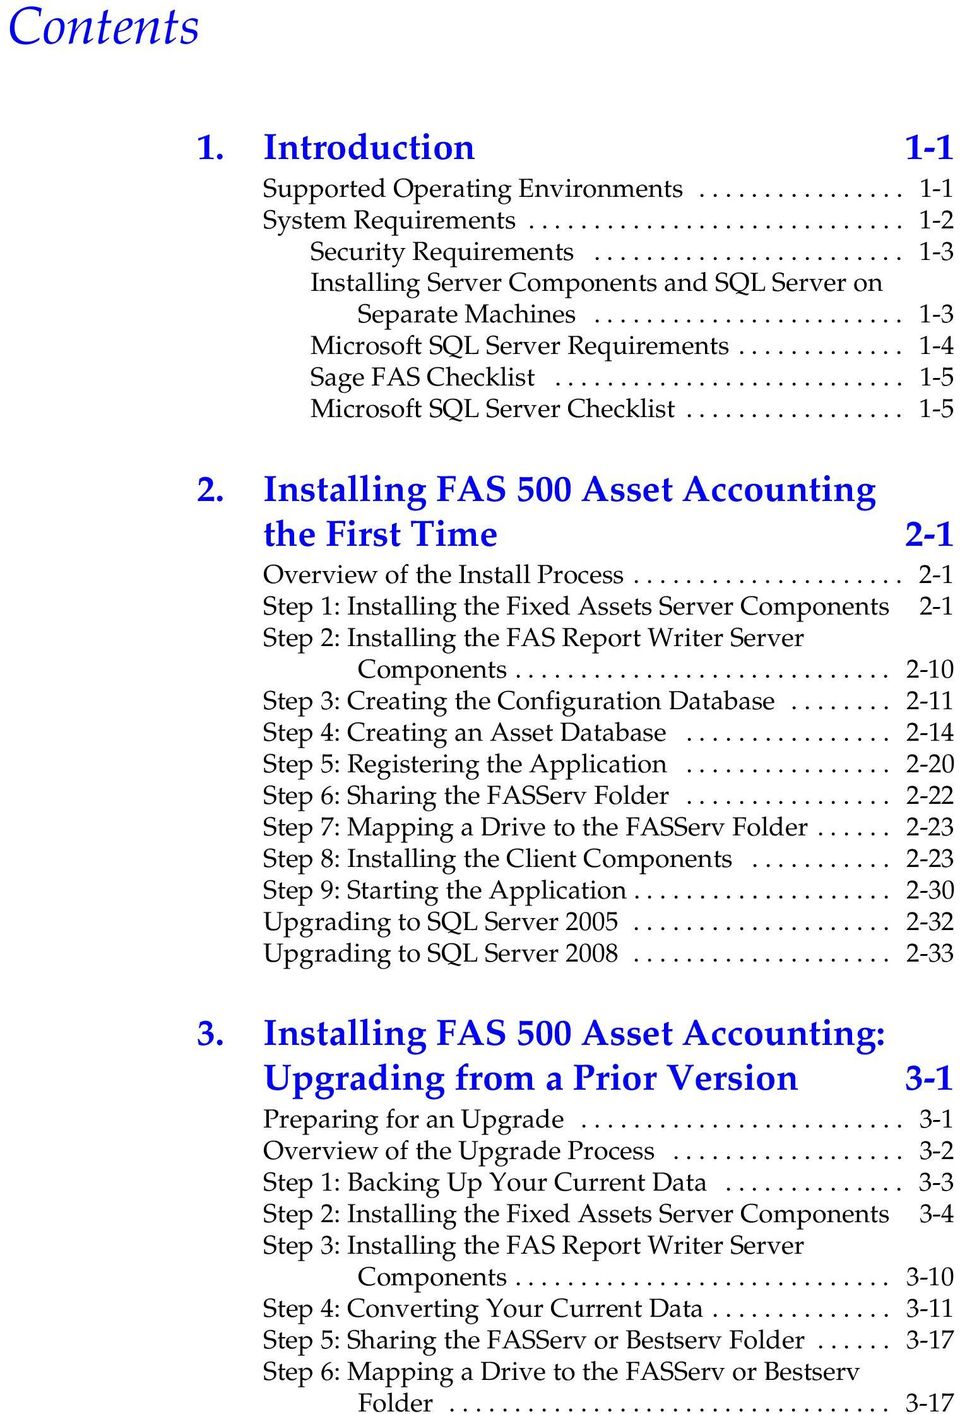 .......................... 1-5 Microsoft SQL Server Checklist................. 1-5 2. Installing FAS 500 Asset Accounting the First Time 2-1 Overview of the Install Process.